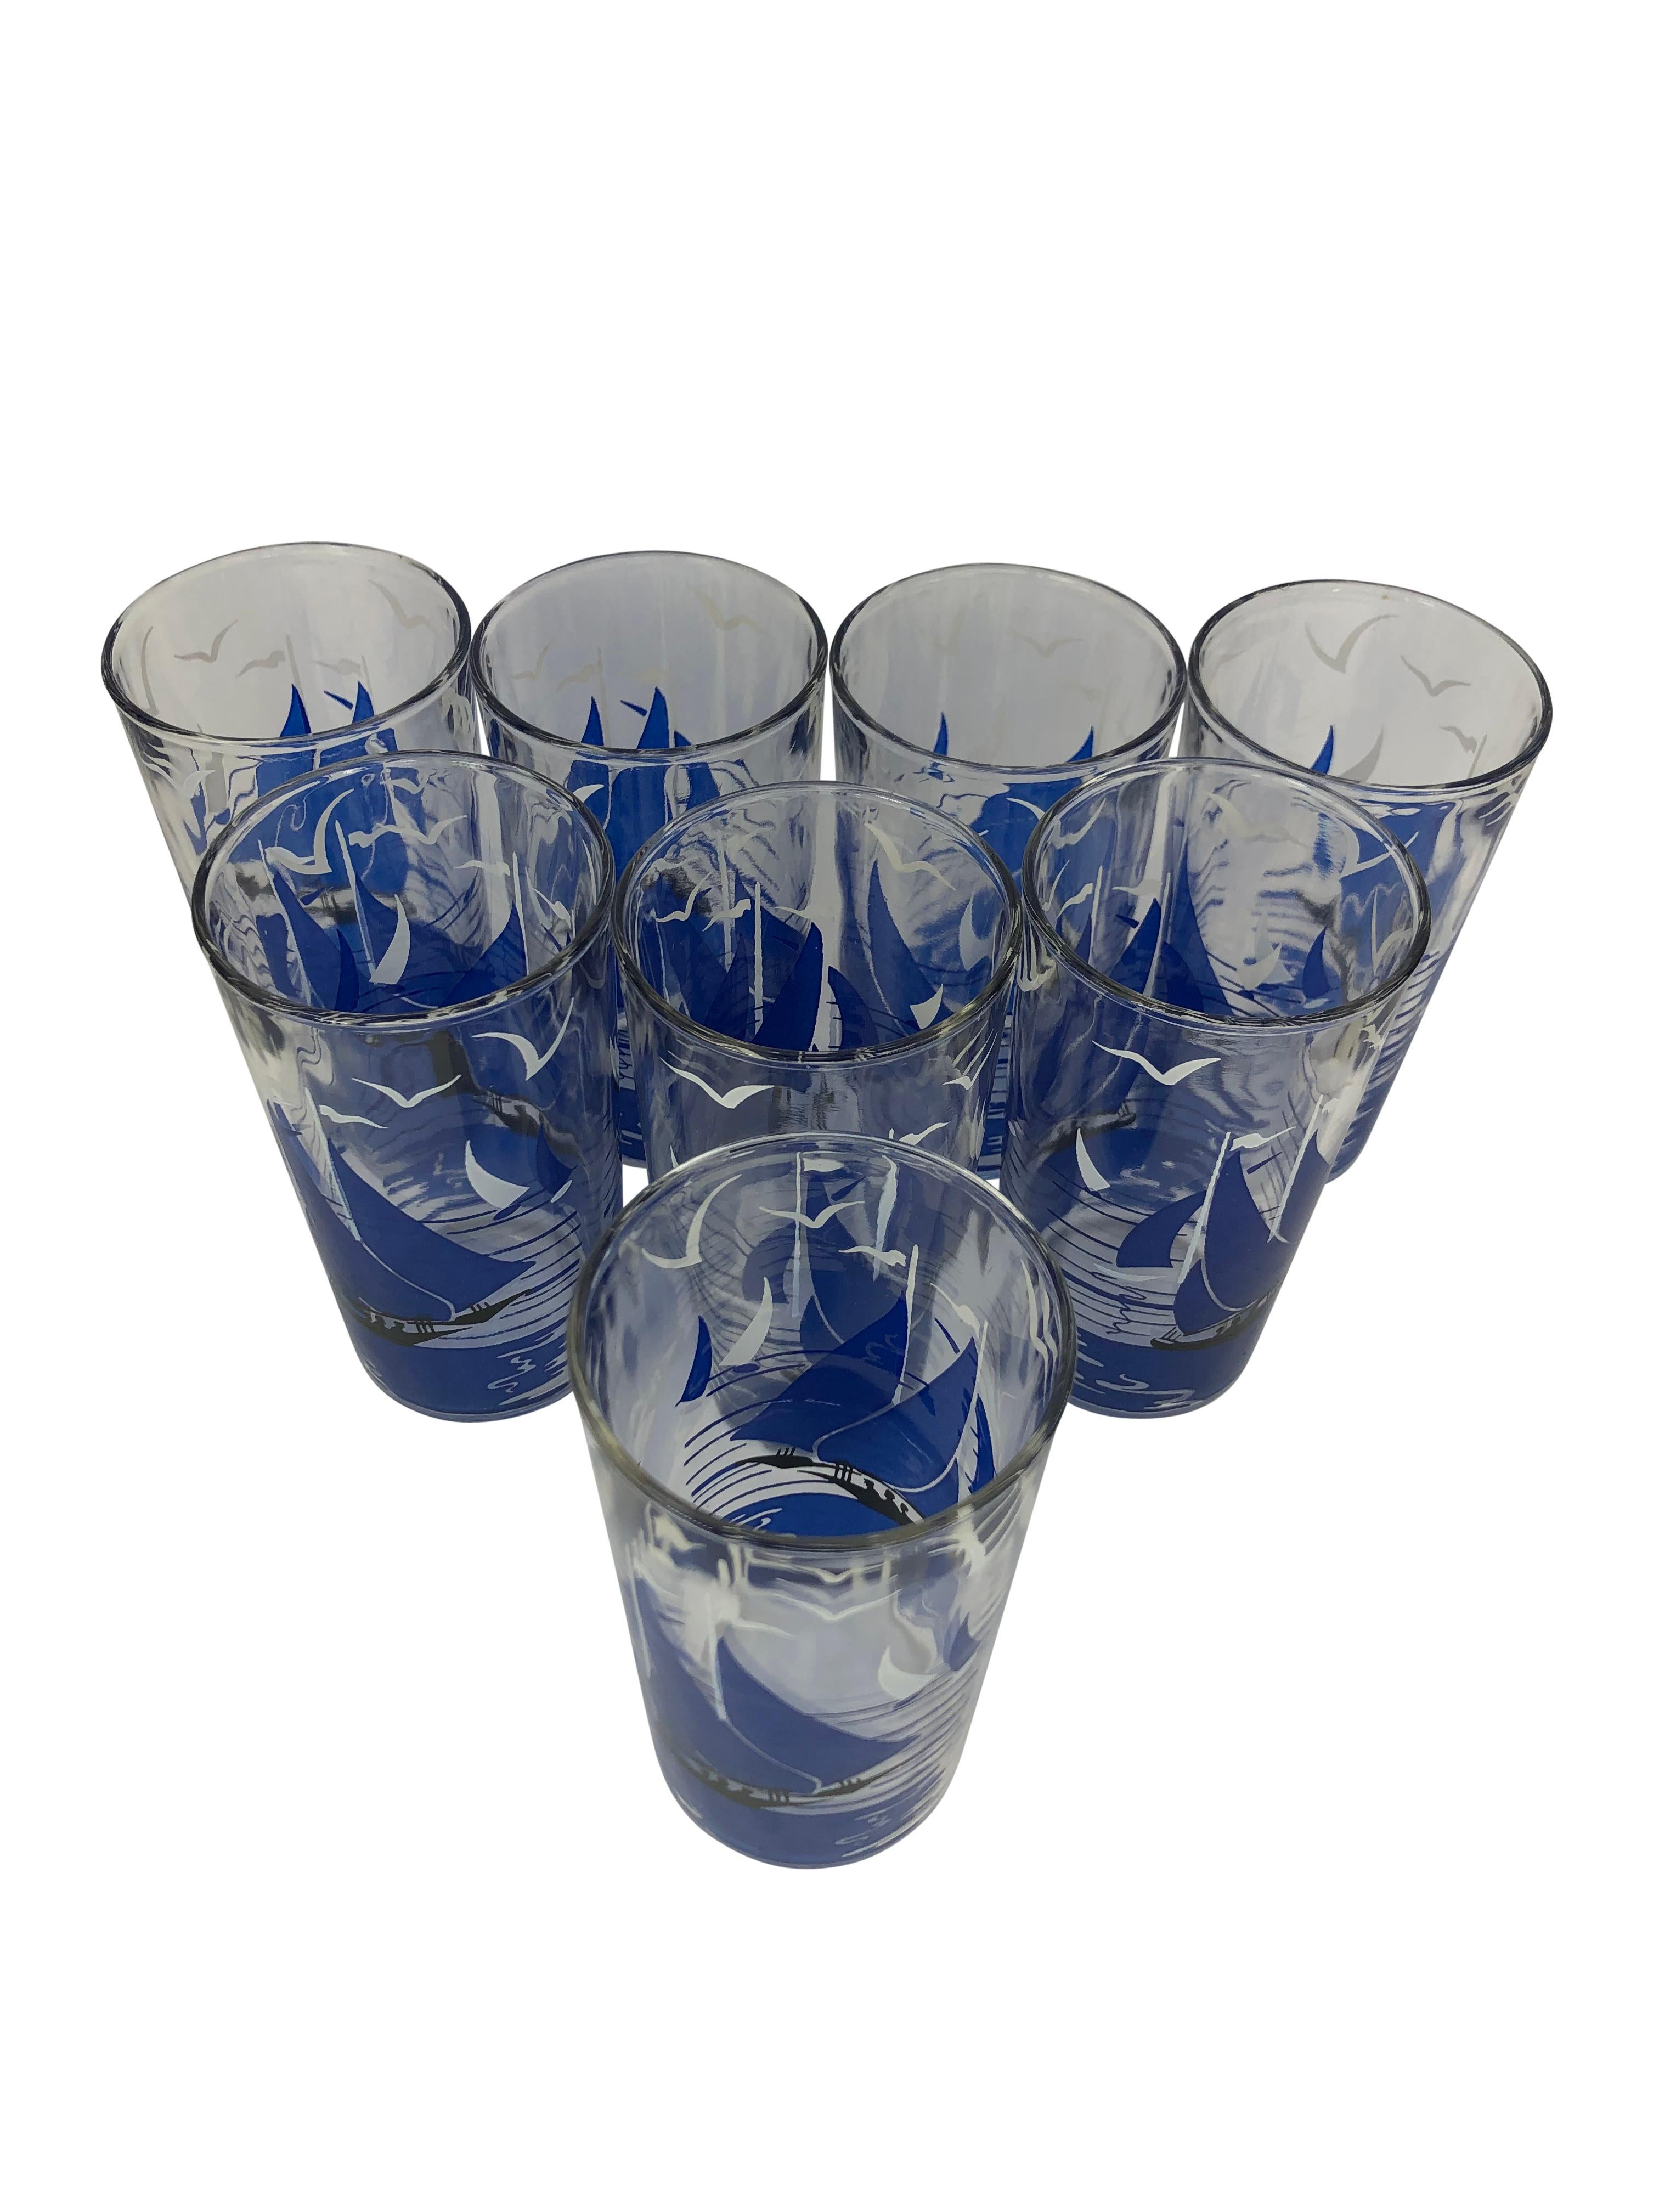 20th Century Set of 8 Vintage Mid Century Tumblers With Sailboats in Boat-Shaped Caddy For Sale